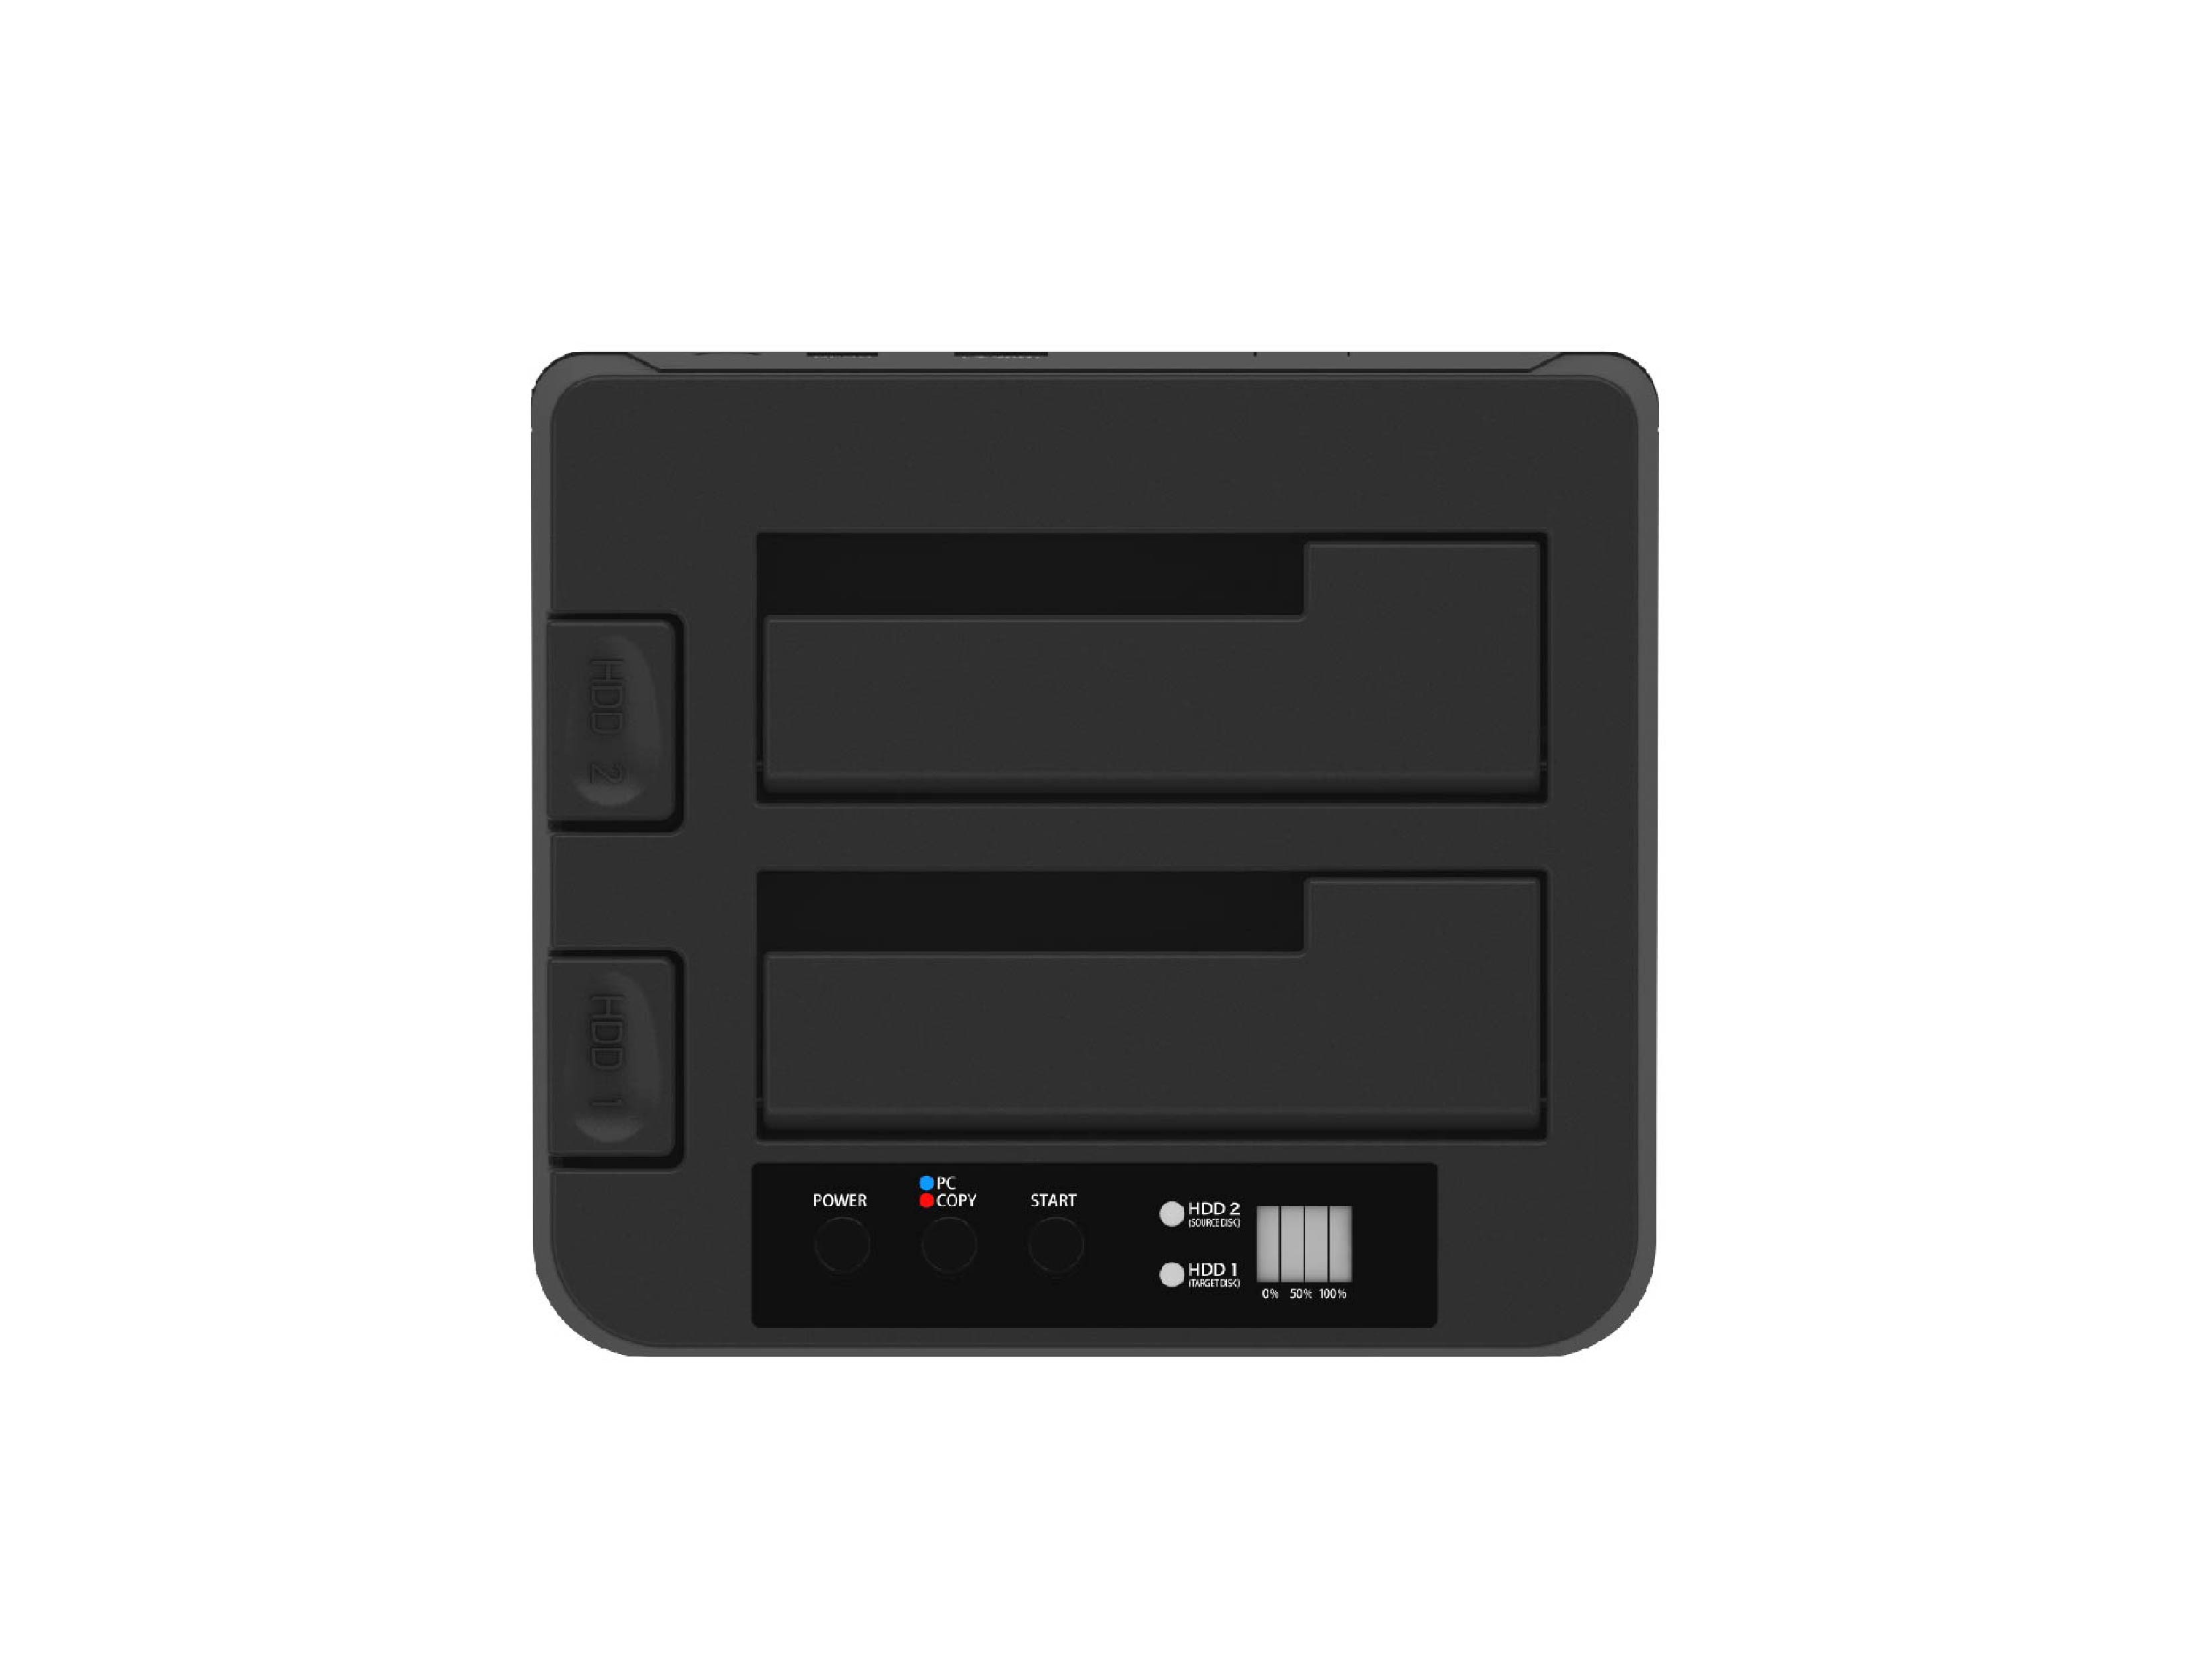 2 Bay SATA SSD/HDD Duplicator Dock (SI-7928USJ3-D), applicable with 2x 3.5" or 2.5" SATA HDD/SSD, support PC mode & clone mode switchable, USB-B 5Gbps to host.